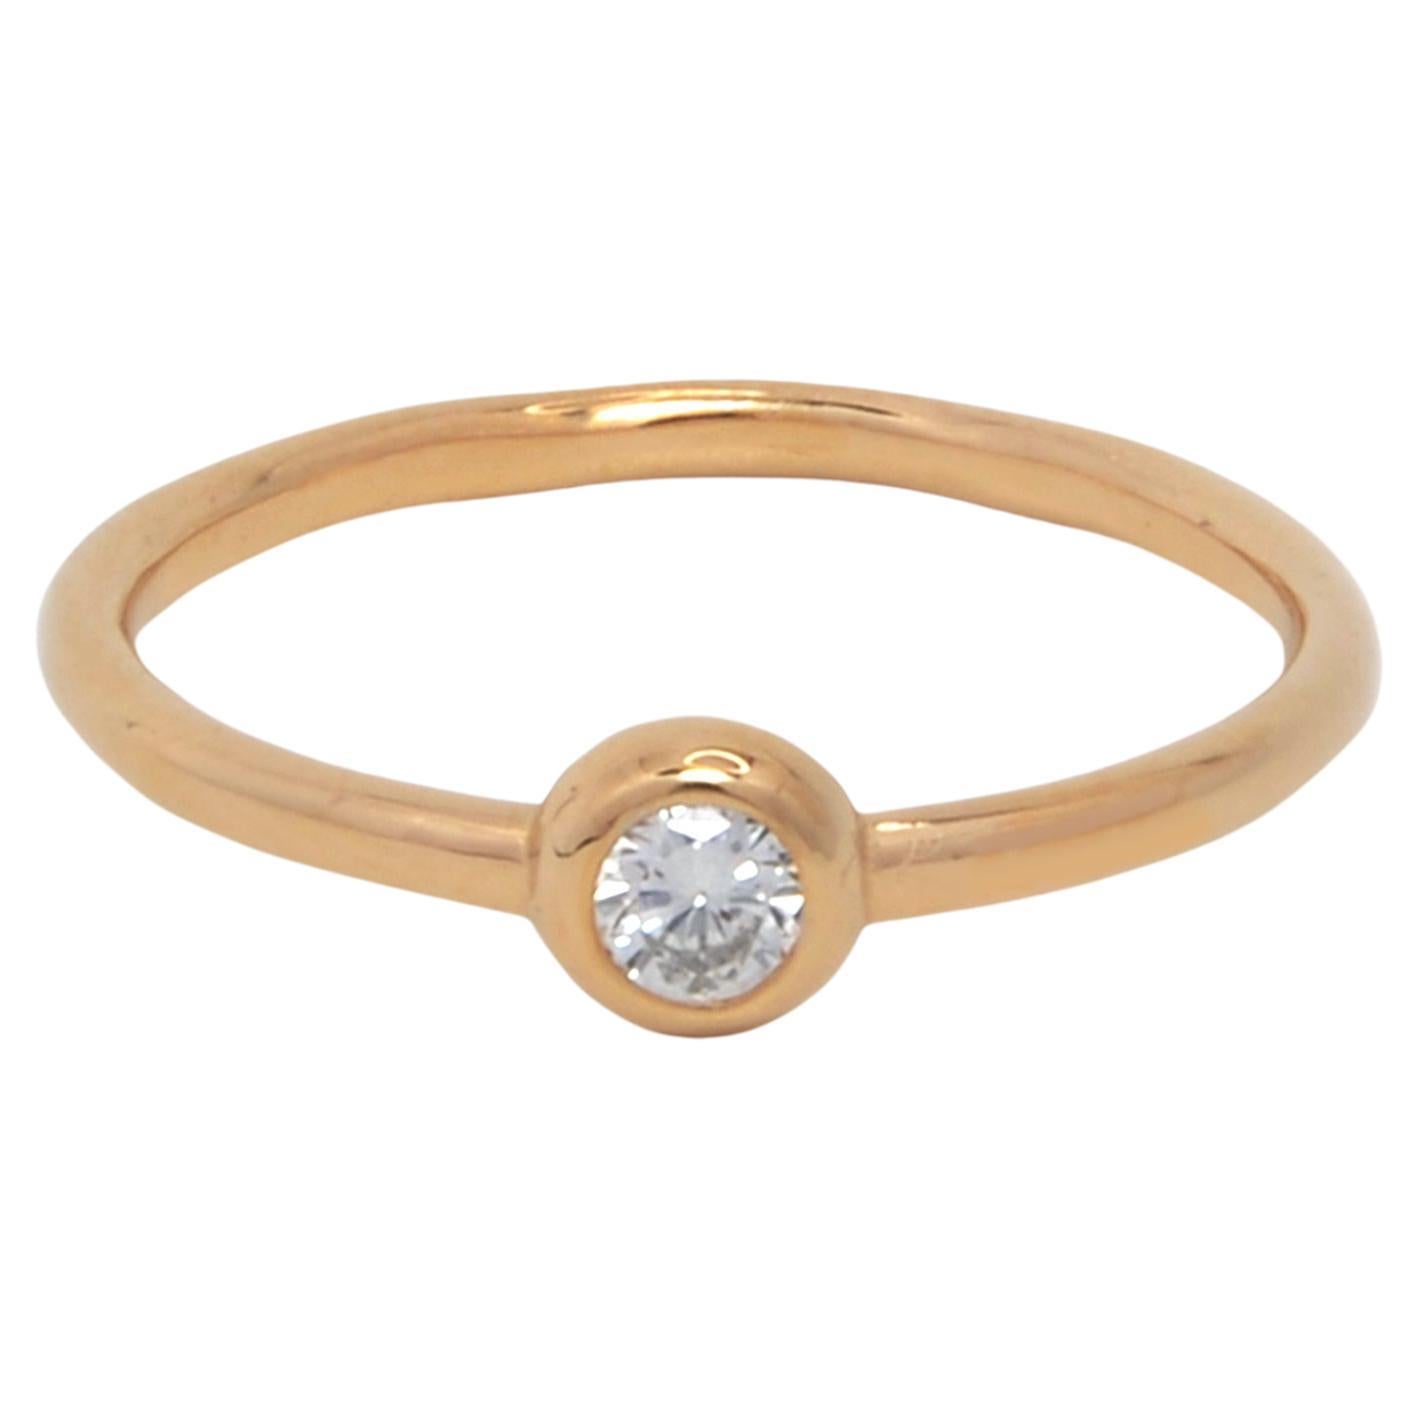 For Sale:  Ruth Nyc Ane Ring, Solitaire Diamond Ring in 14k Yellow Gold